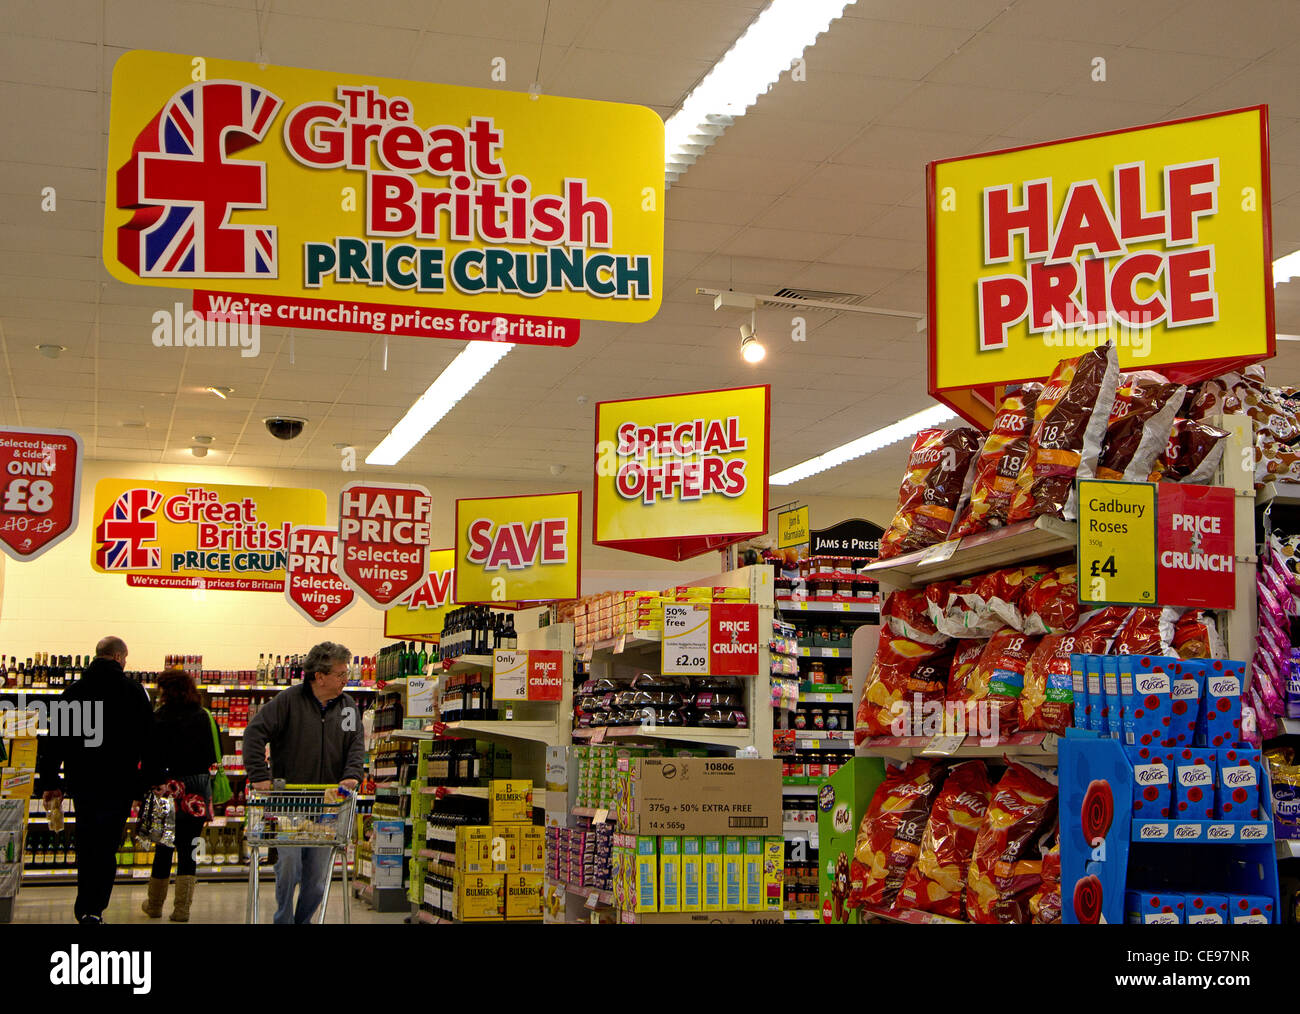 Morrisons' Share Price / Half Price And Special Offer ...